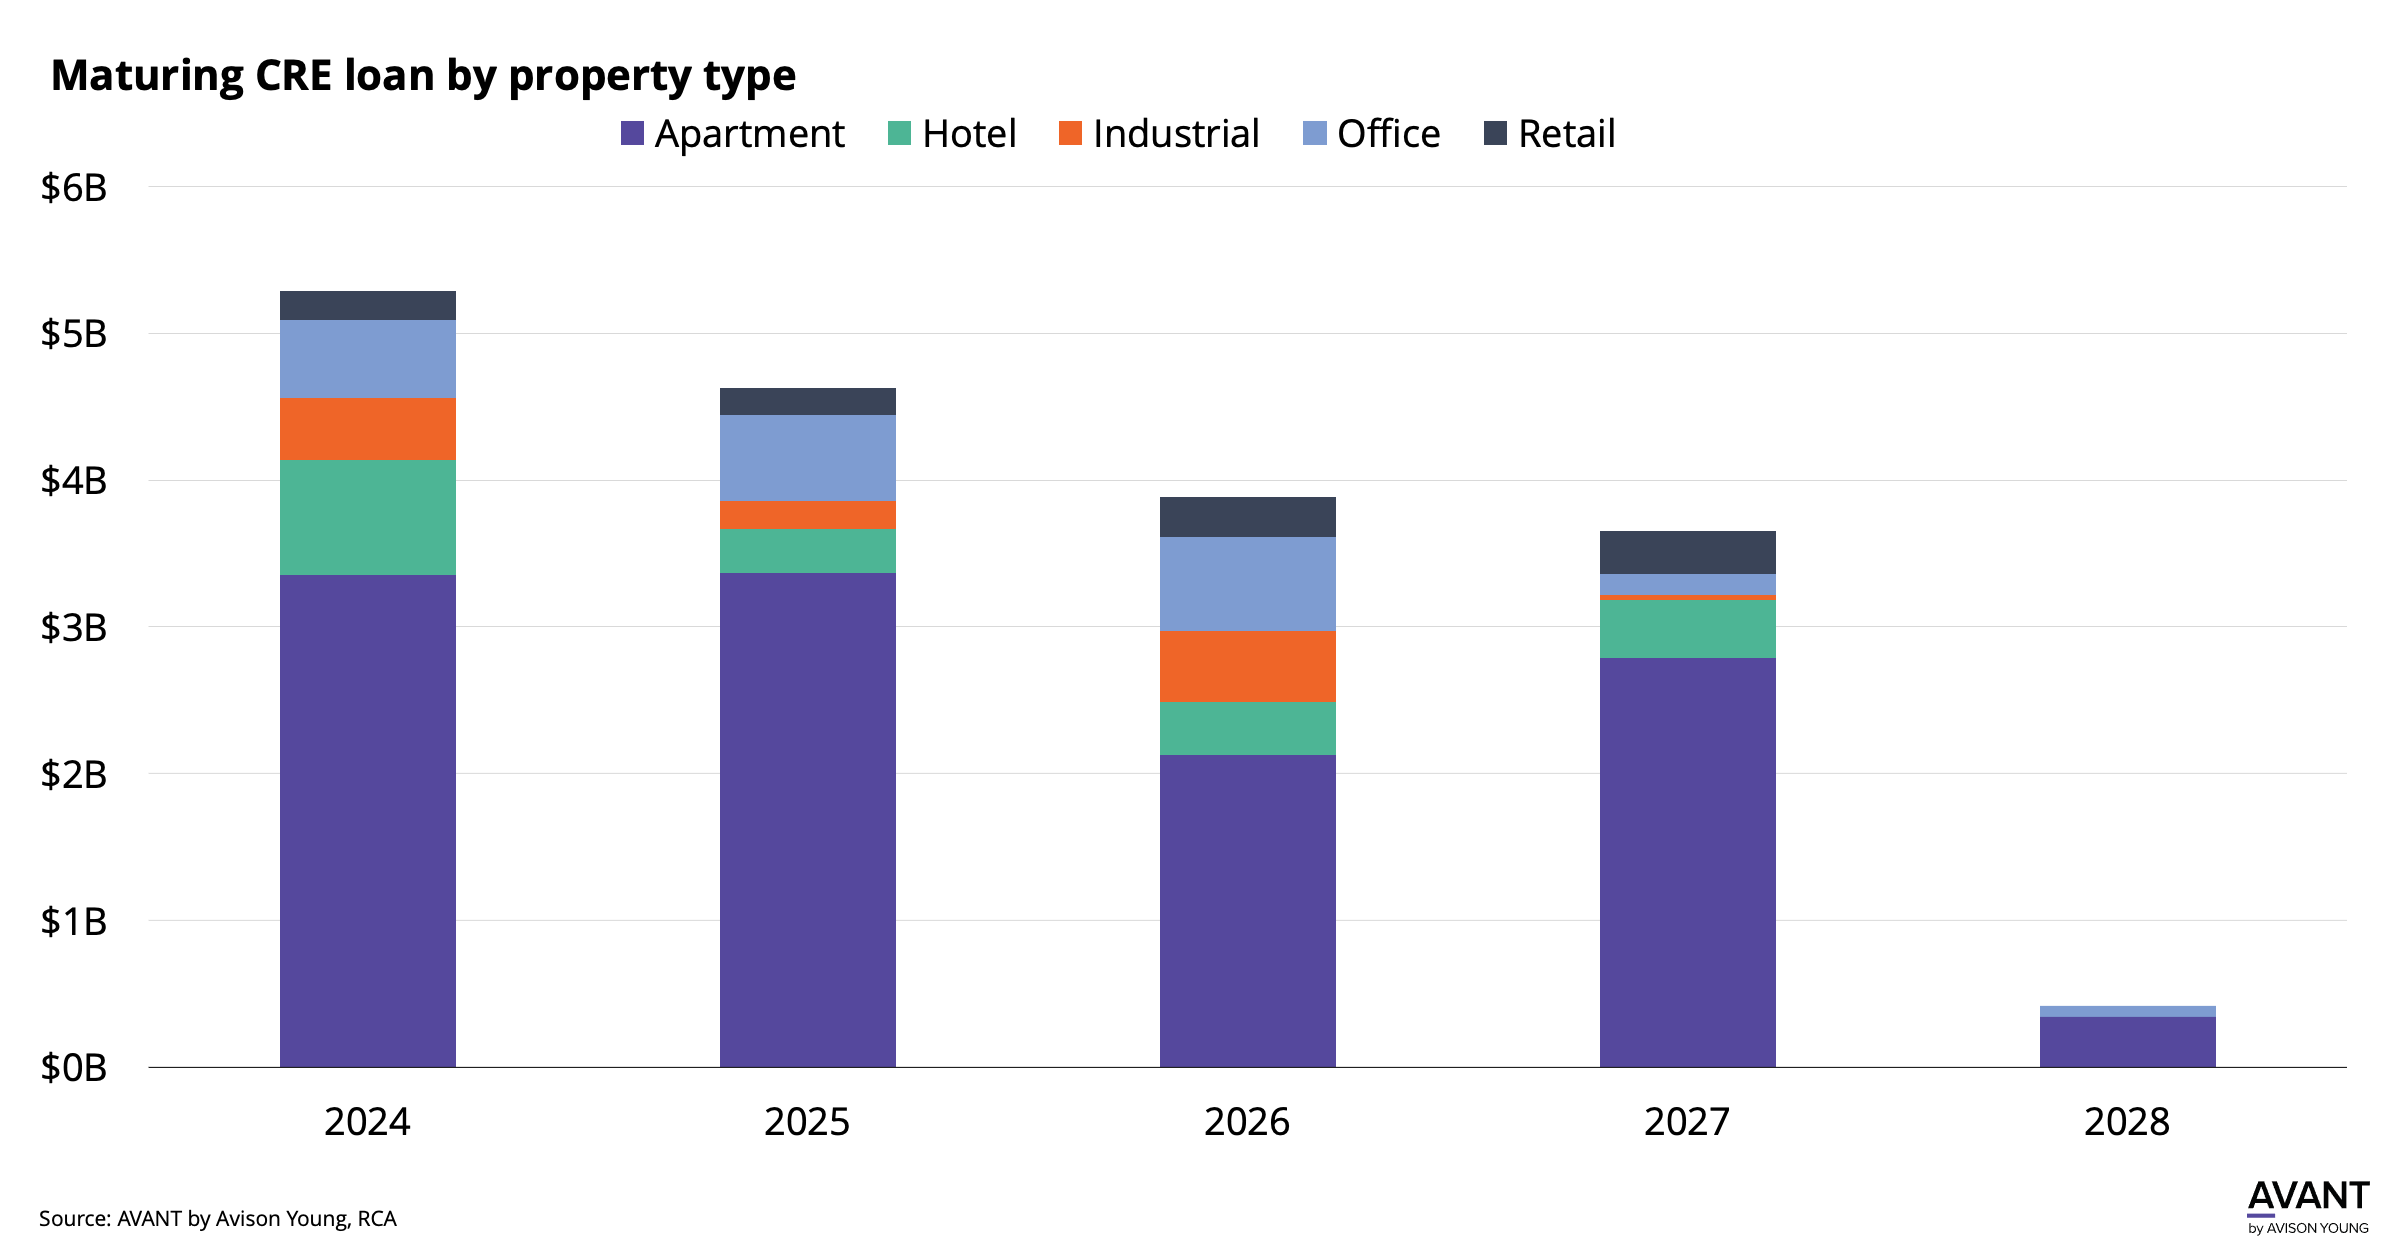 Maturing CRE loan by property type in Austin, Texas from 2024 to 2028